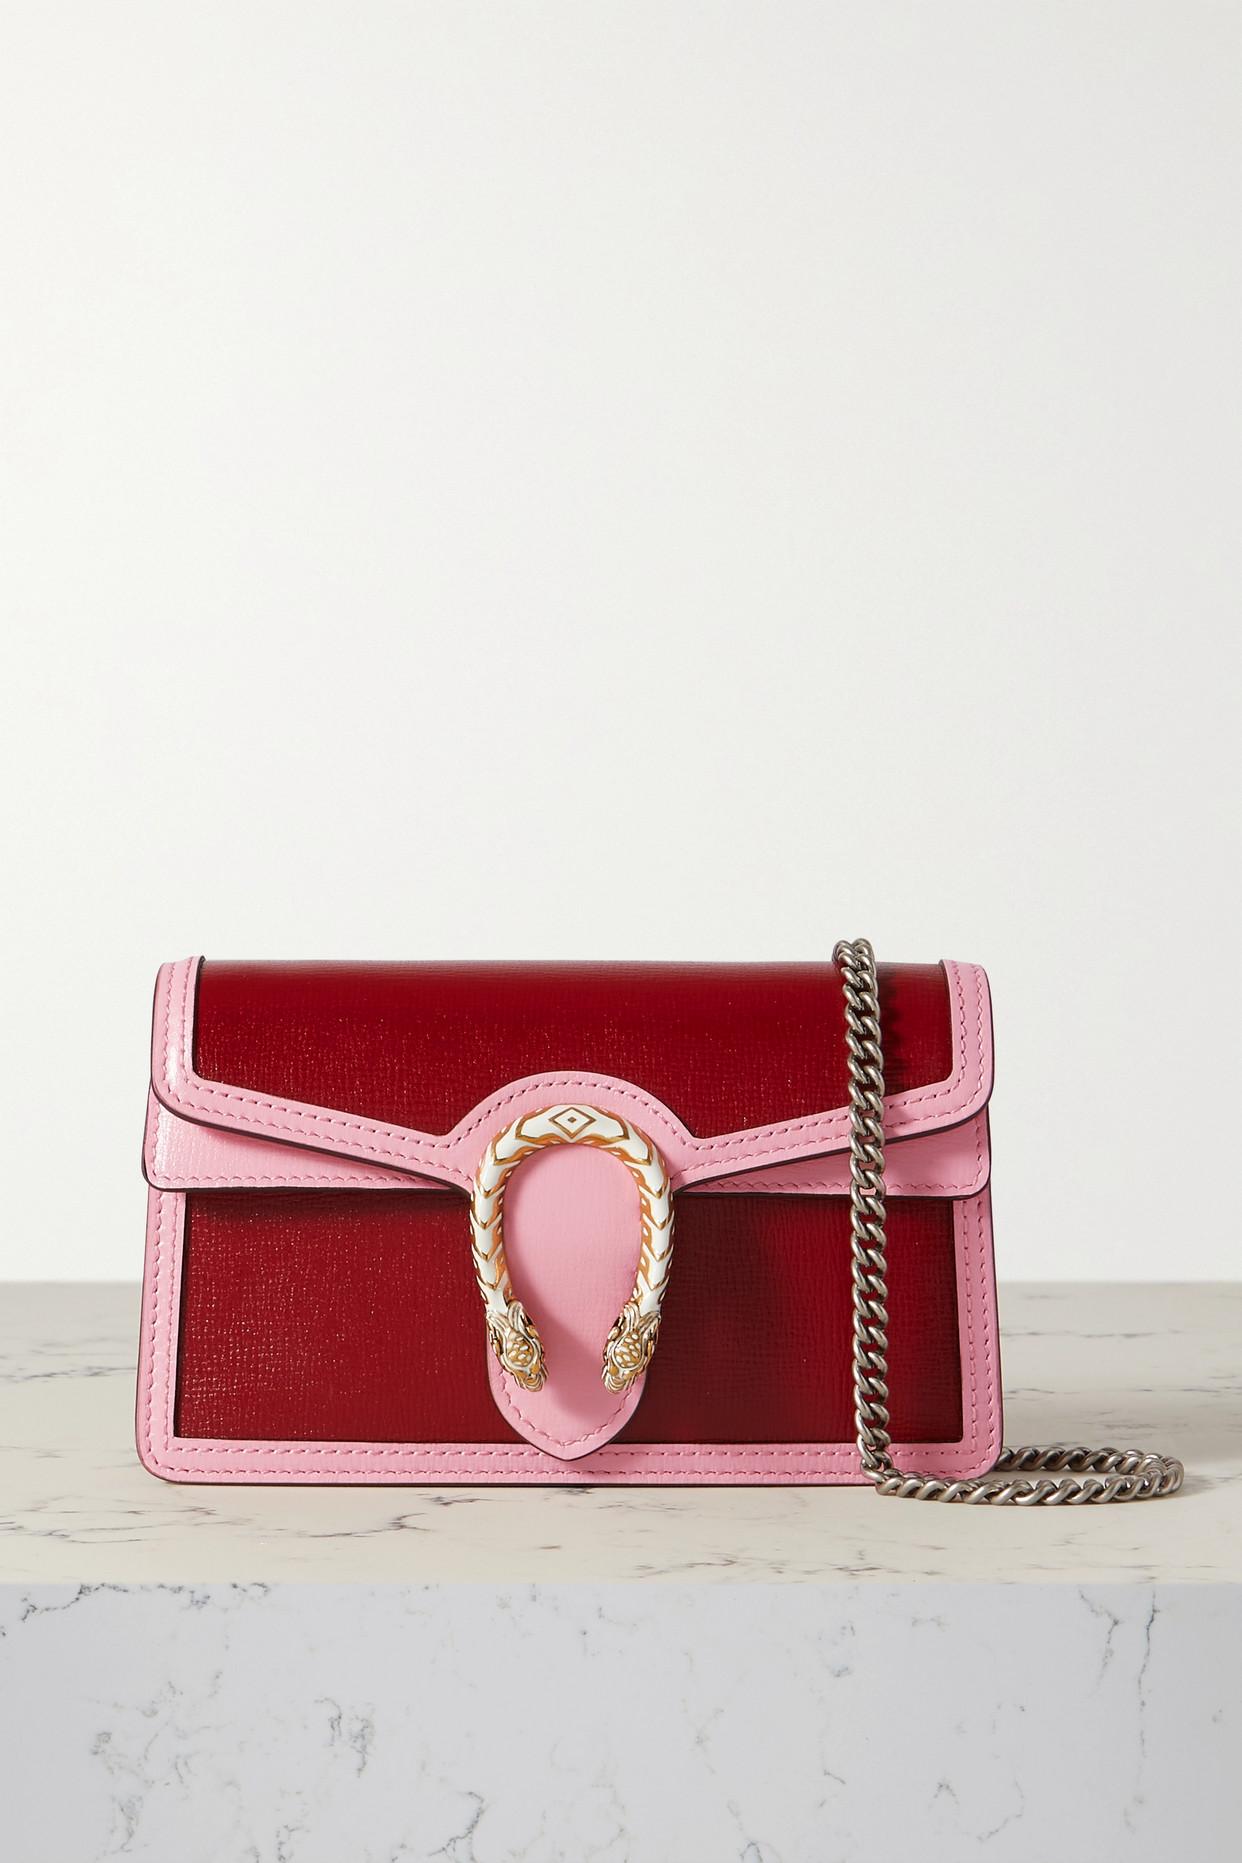 Gucci Dionysus Super Mini Two-tone Leather Shoulder Bag in Red | Lyst